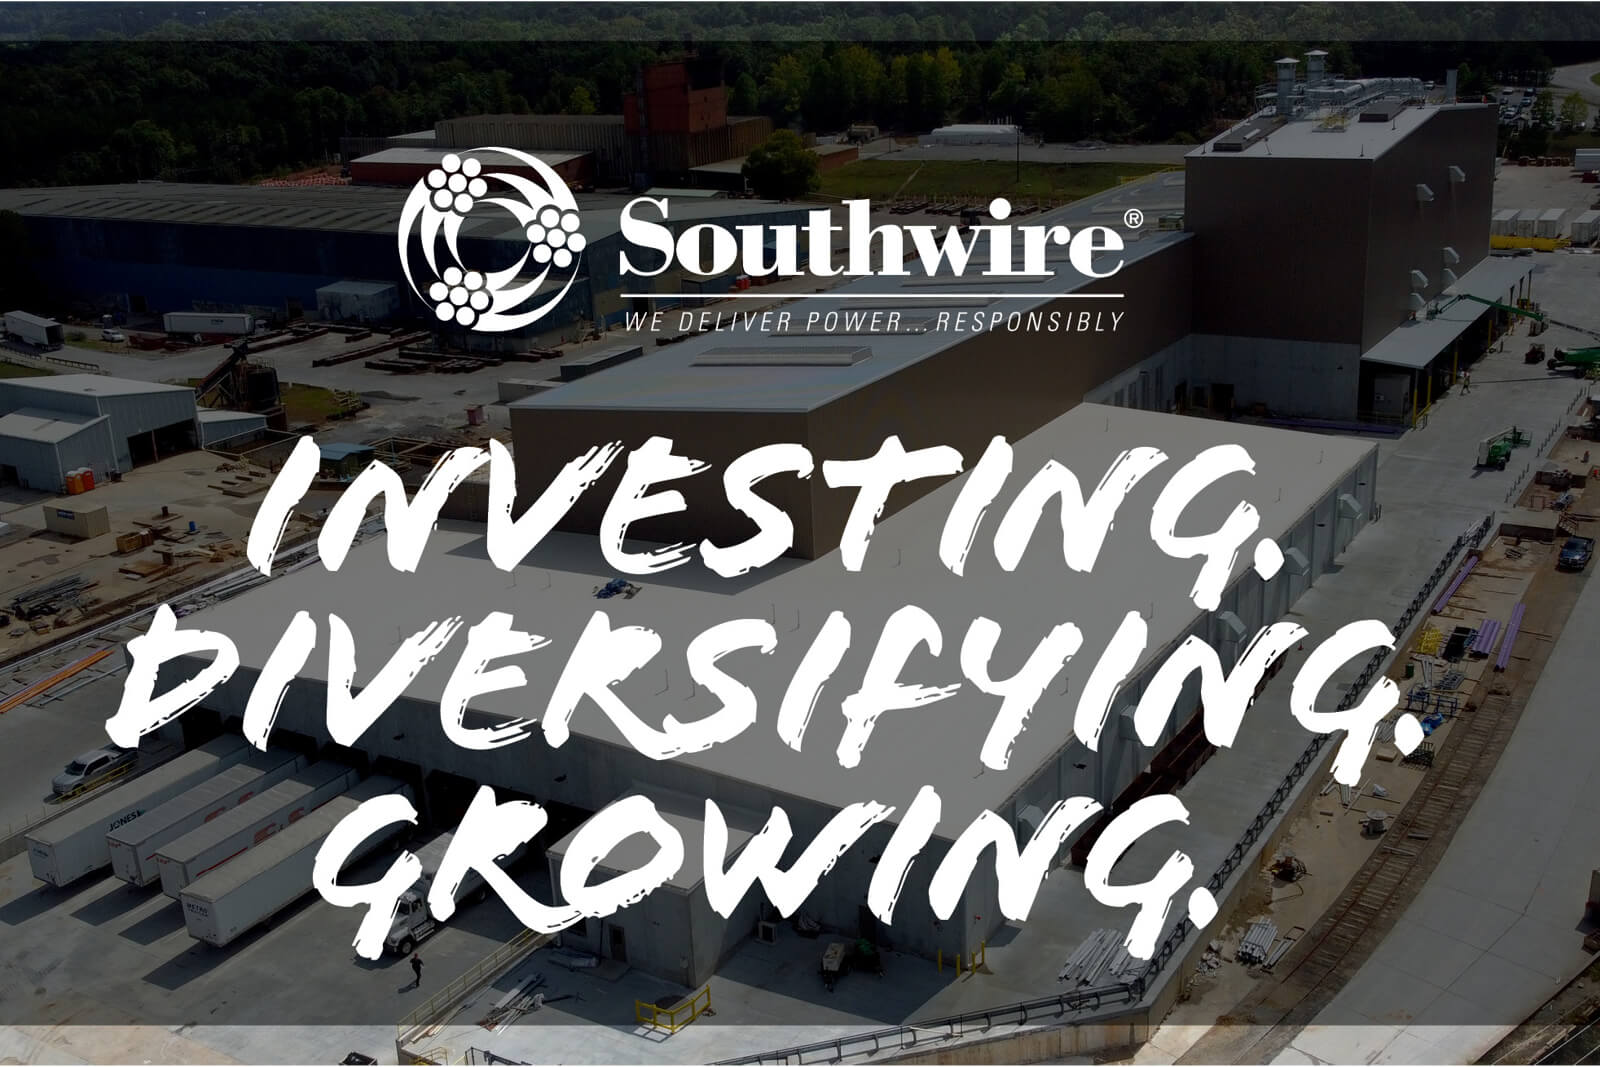 Southwire – Investing, Diversifying and Growing